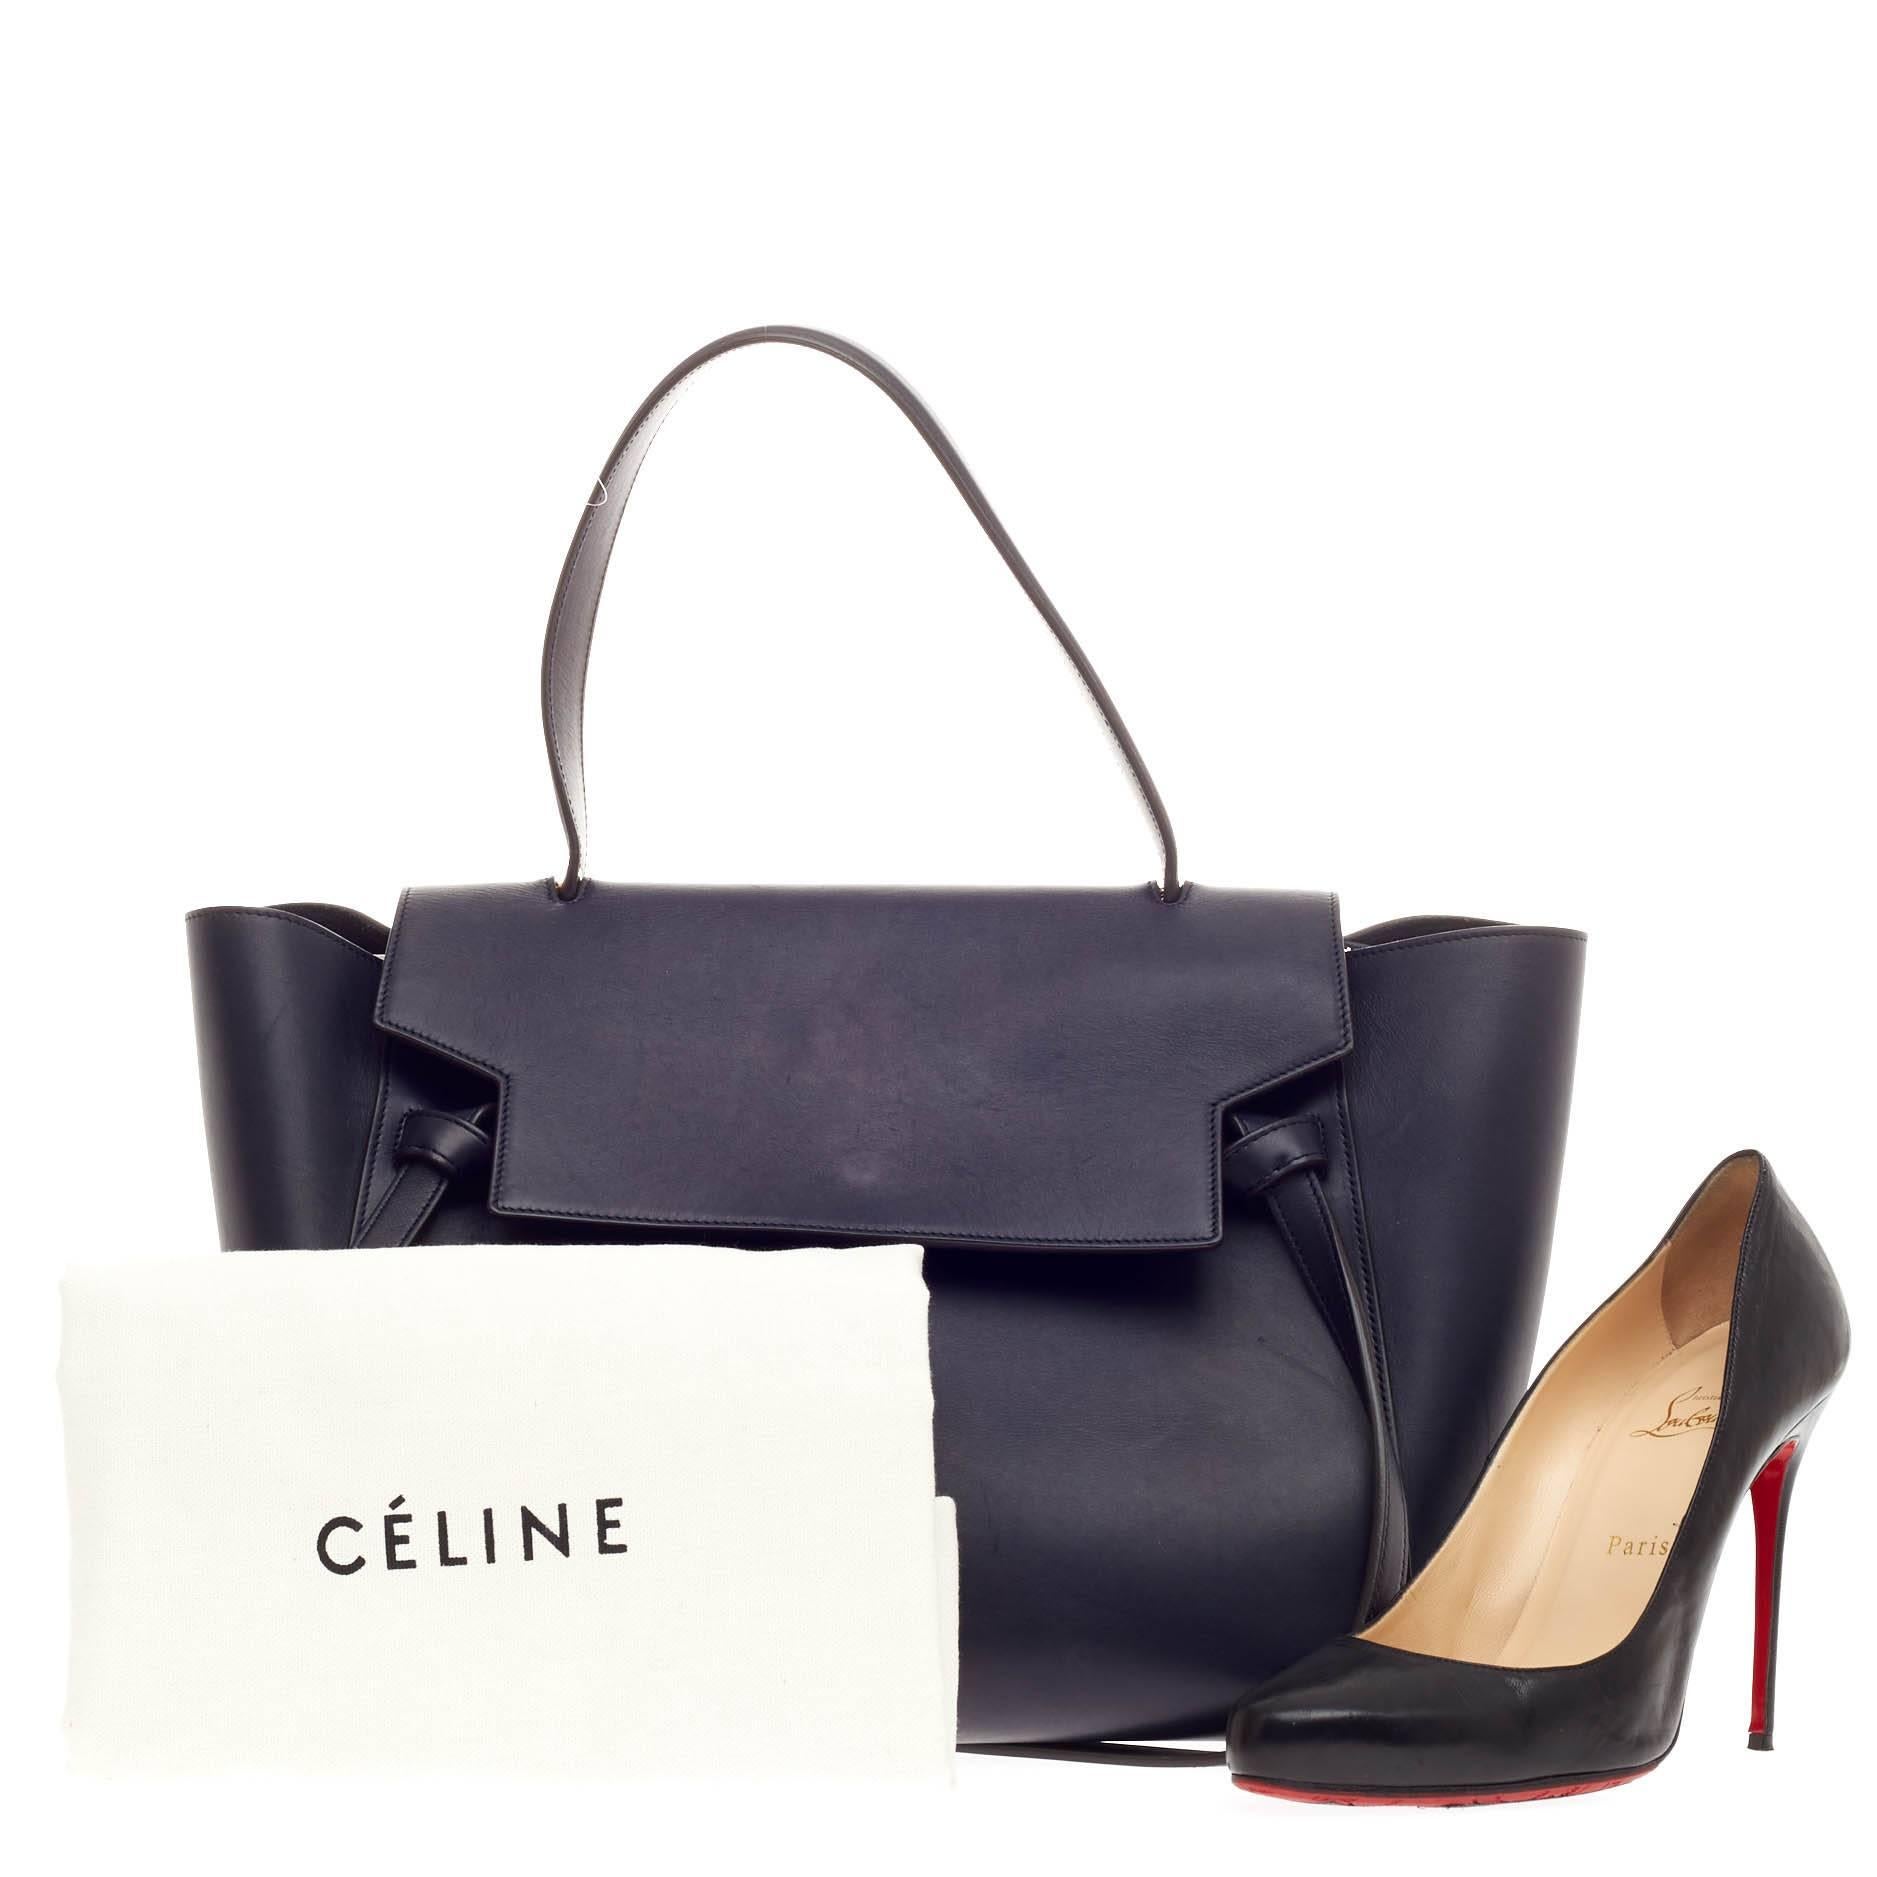 This authentic Celine Belt Bag Calfskin Medium is sure to make a statement. Crafted from beautiful navy blue calfskin leather, this bold and beautiful bag features expanded wings, looped single top handle, top flap slide closure, knotted ties,